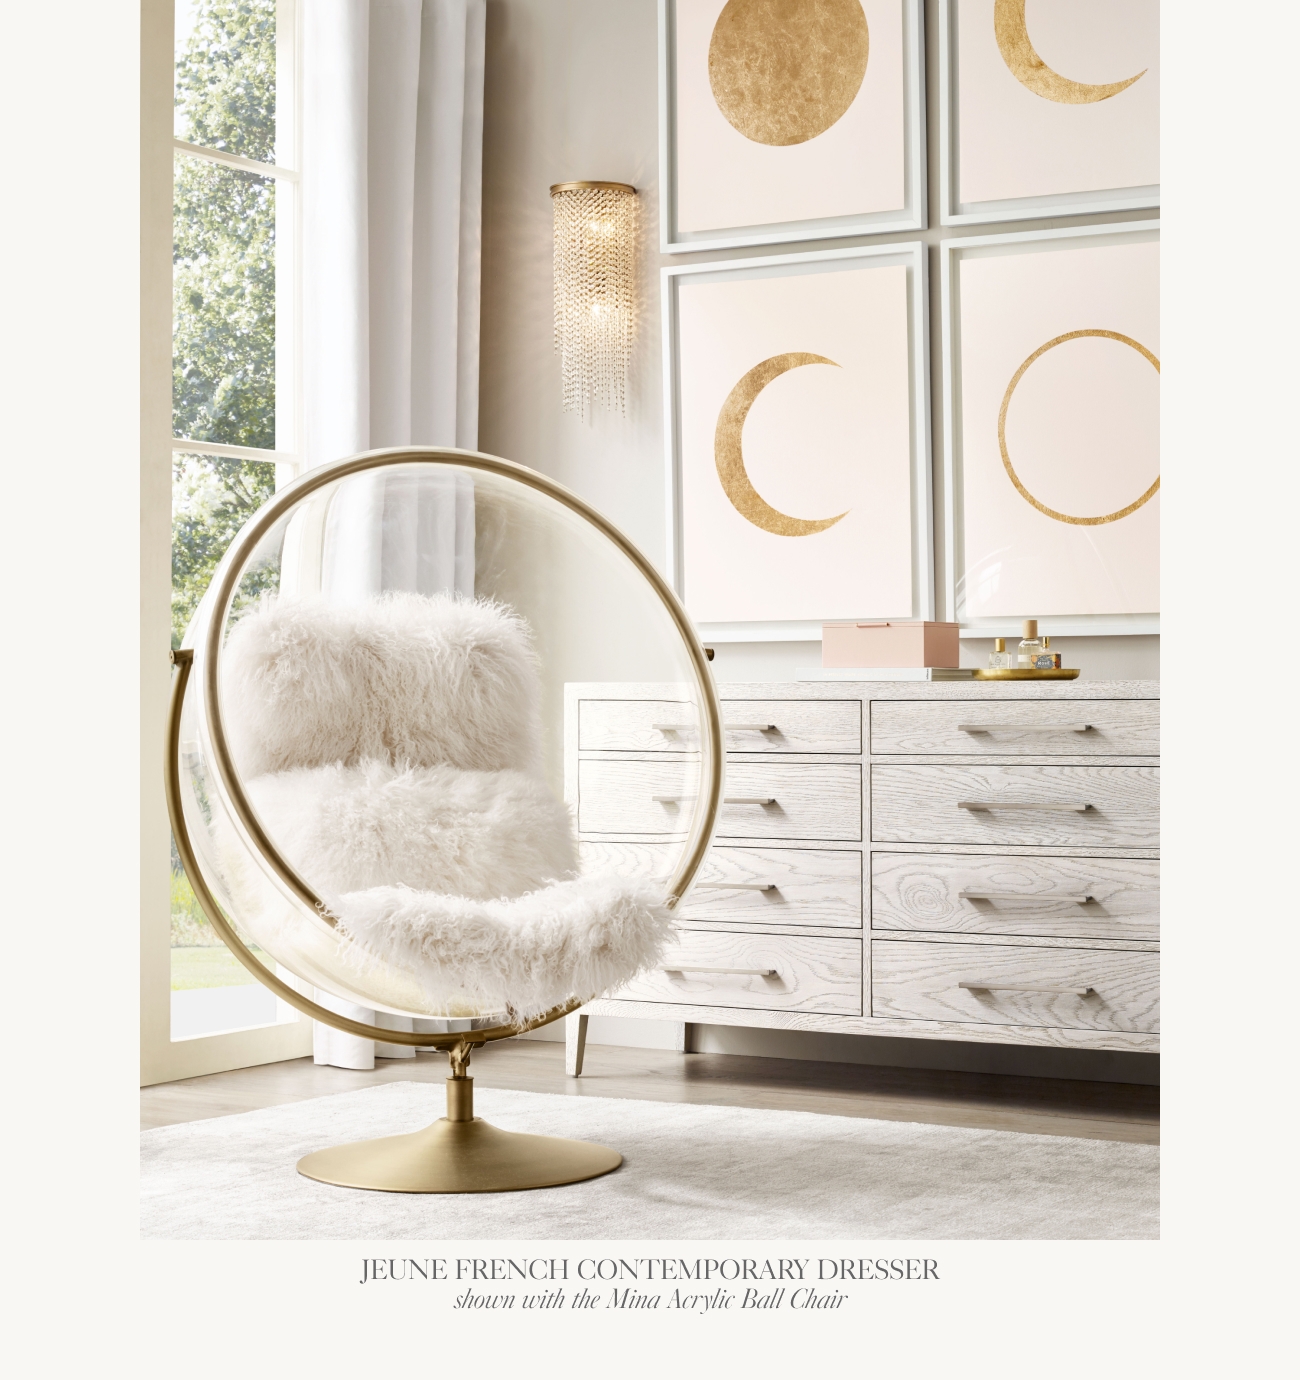  JEUNE FRENCH CONTEMPORARY DRESSER shown with the Mina Acrylic Ball Chair 